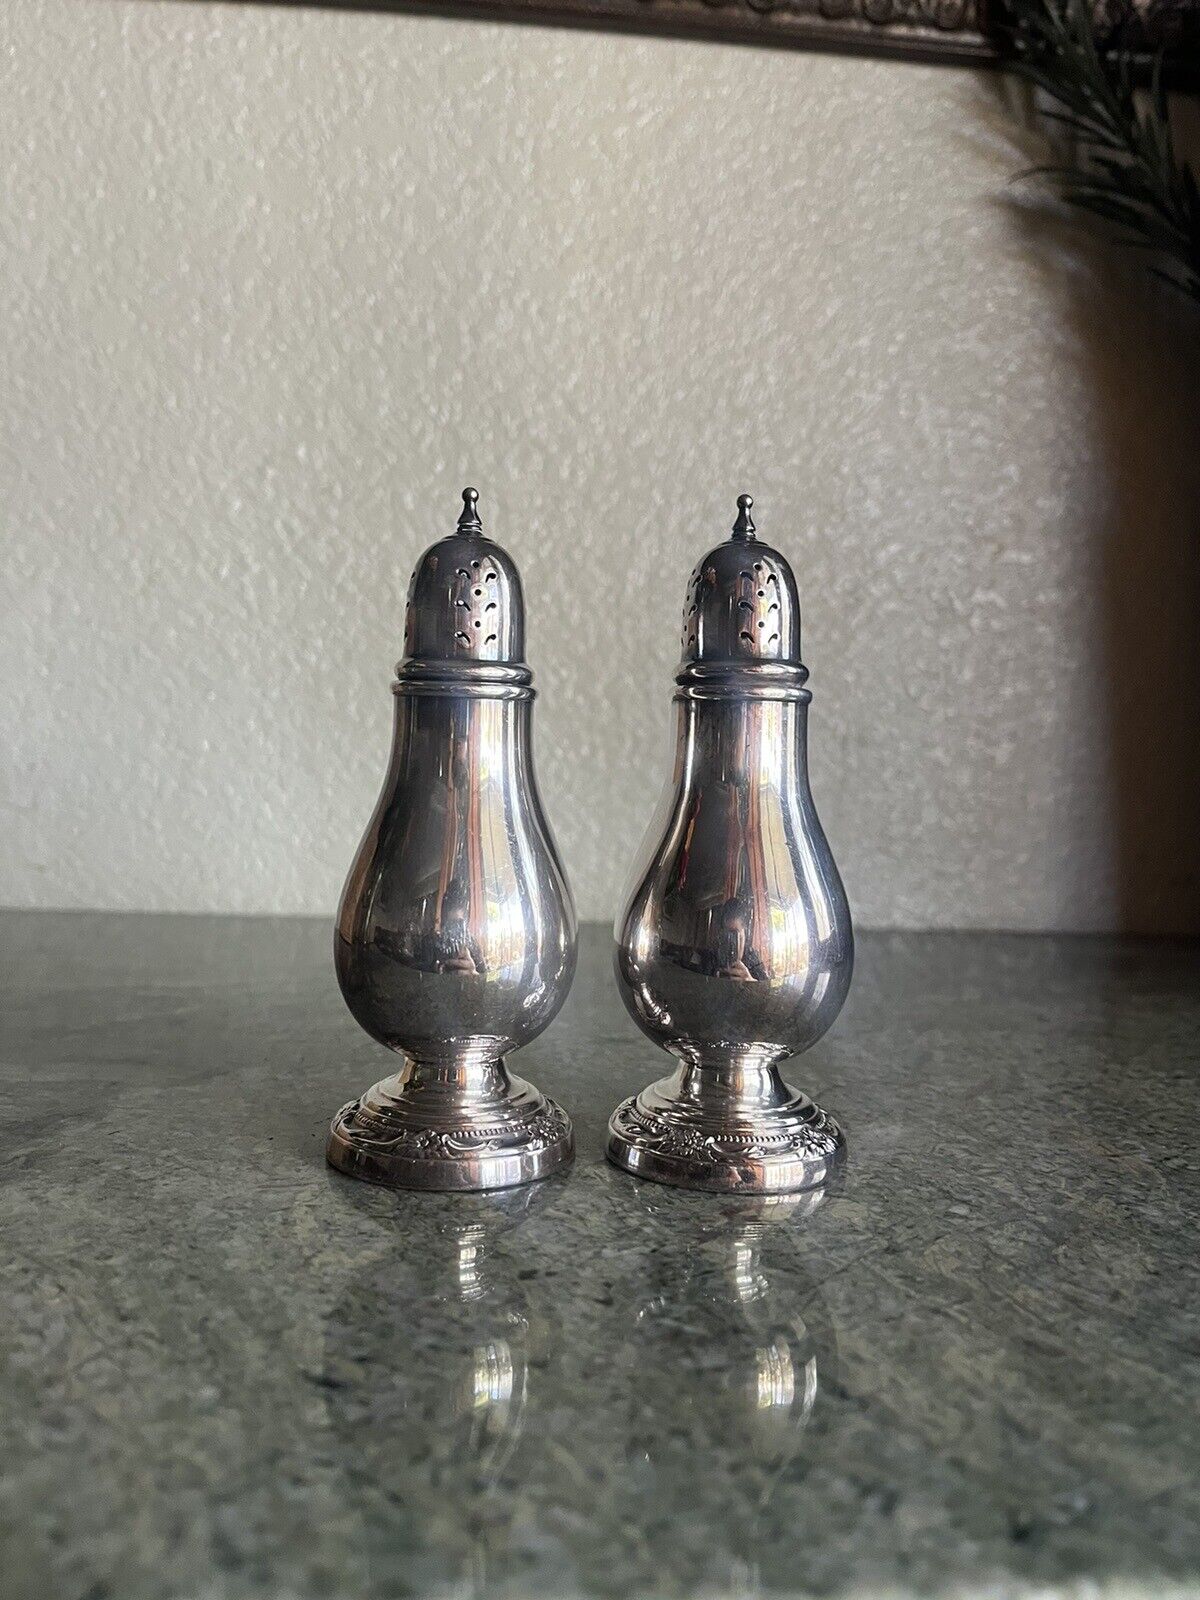 Vintage Remembrance Salt and Pepper Shakers 1847 Rogers Bros. Silverplated